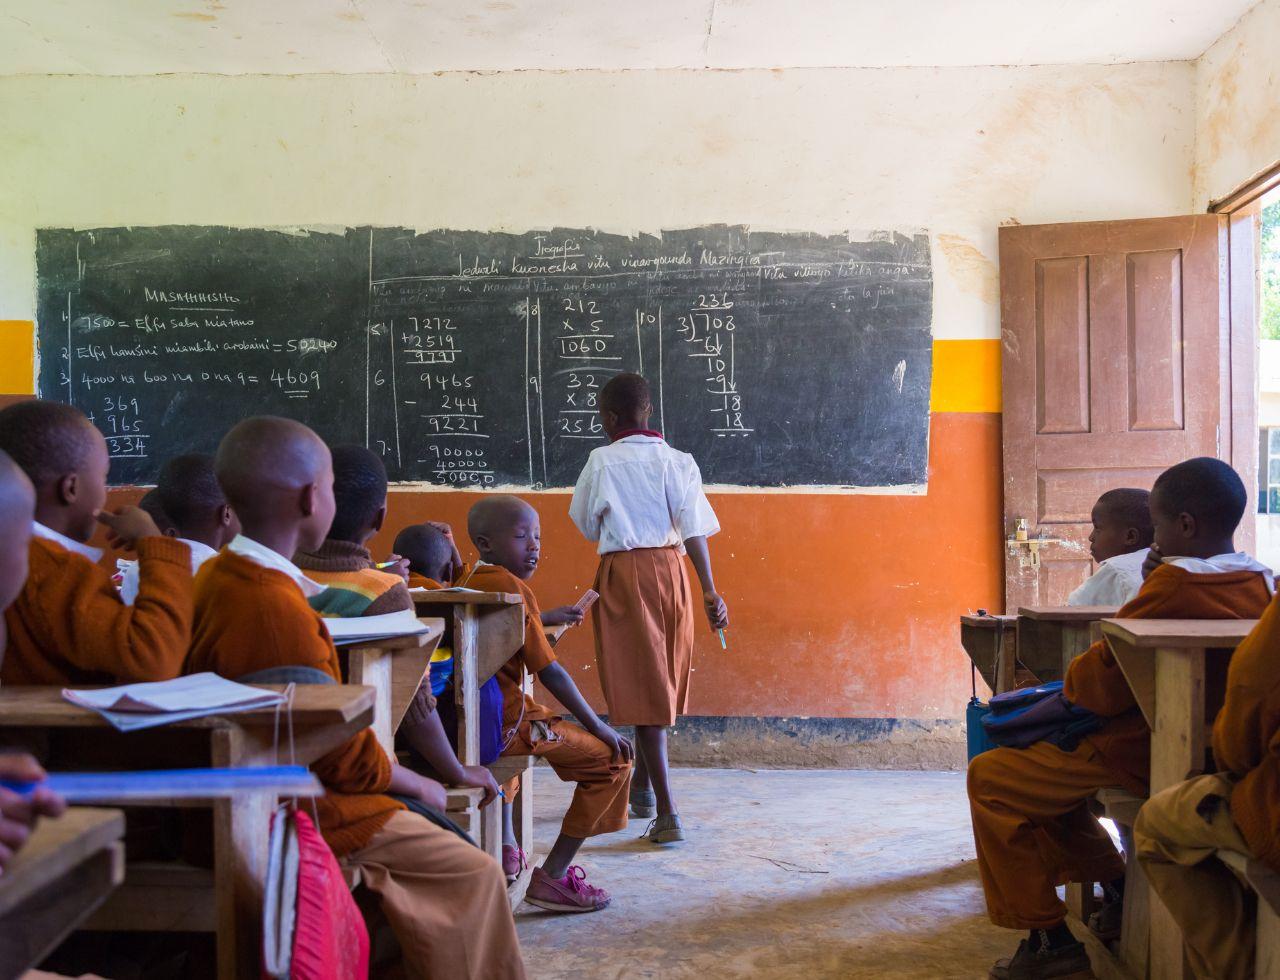 Why Did Europe Neglect Education in African Colonies?